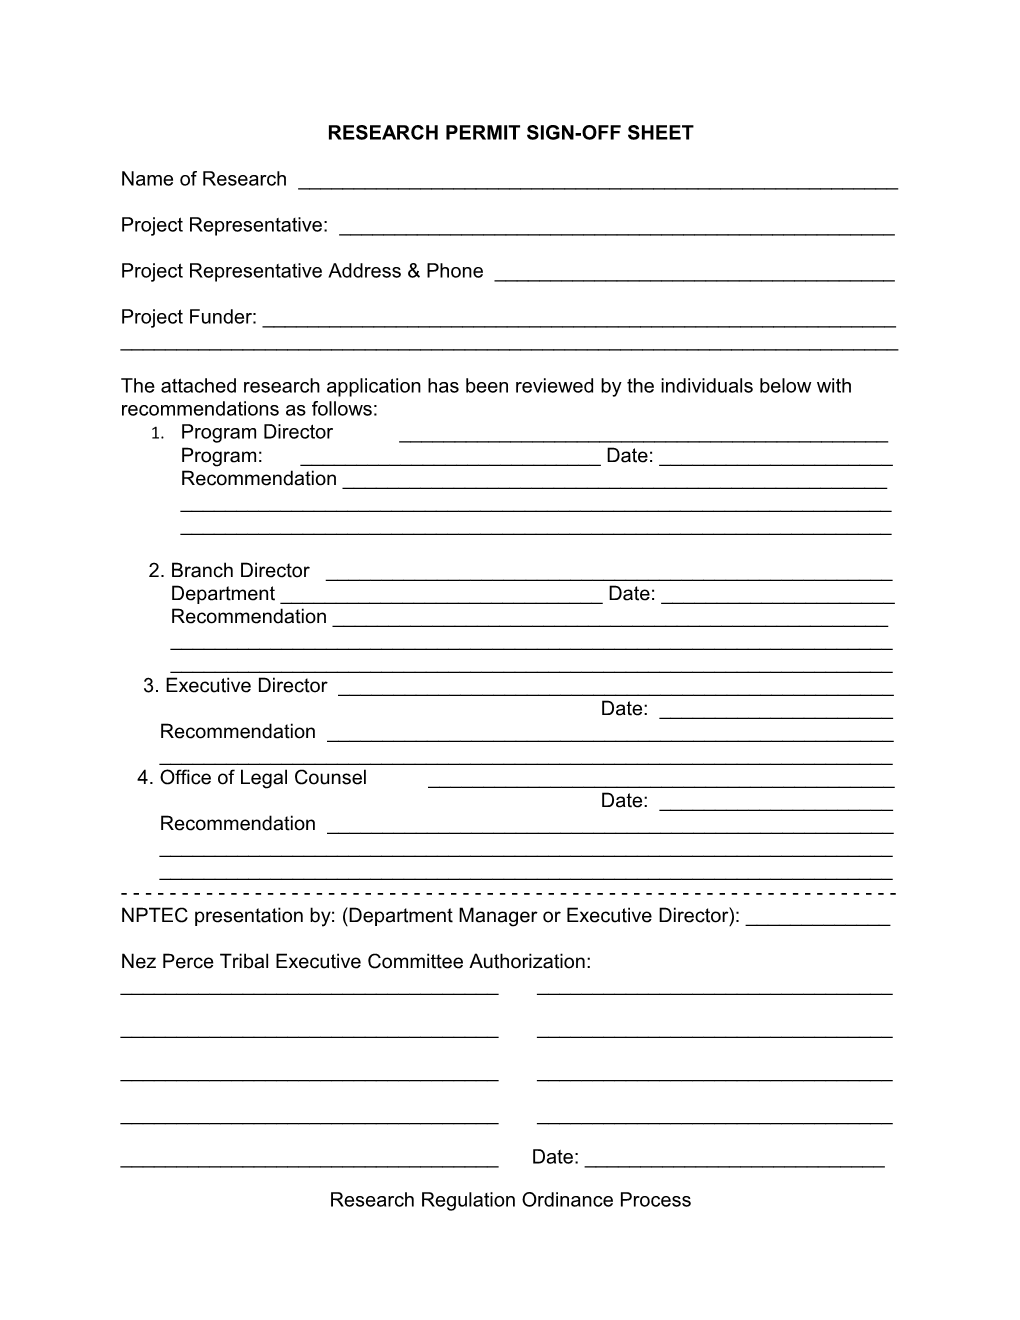 Research Permit Sign-Off Sheet